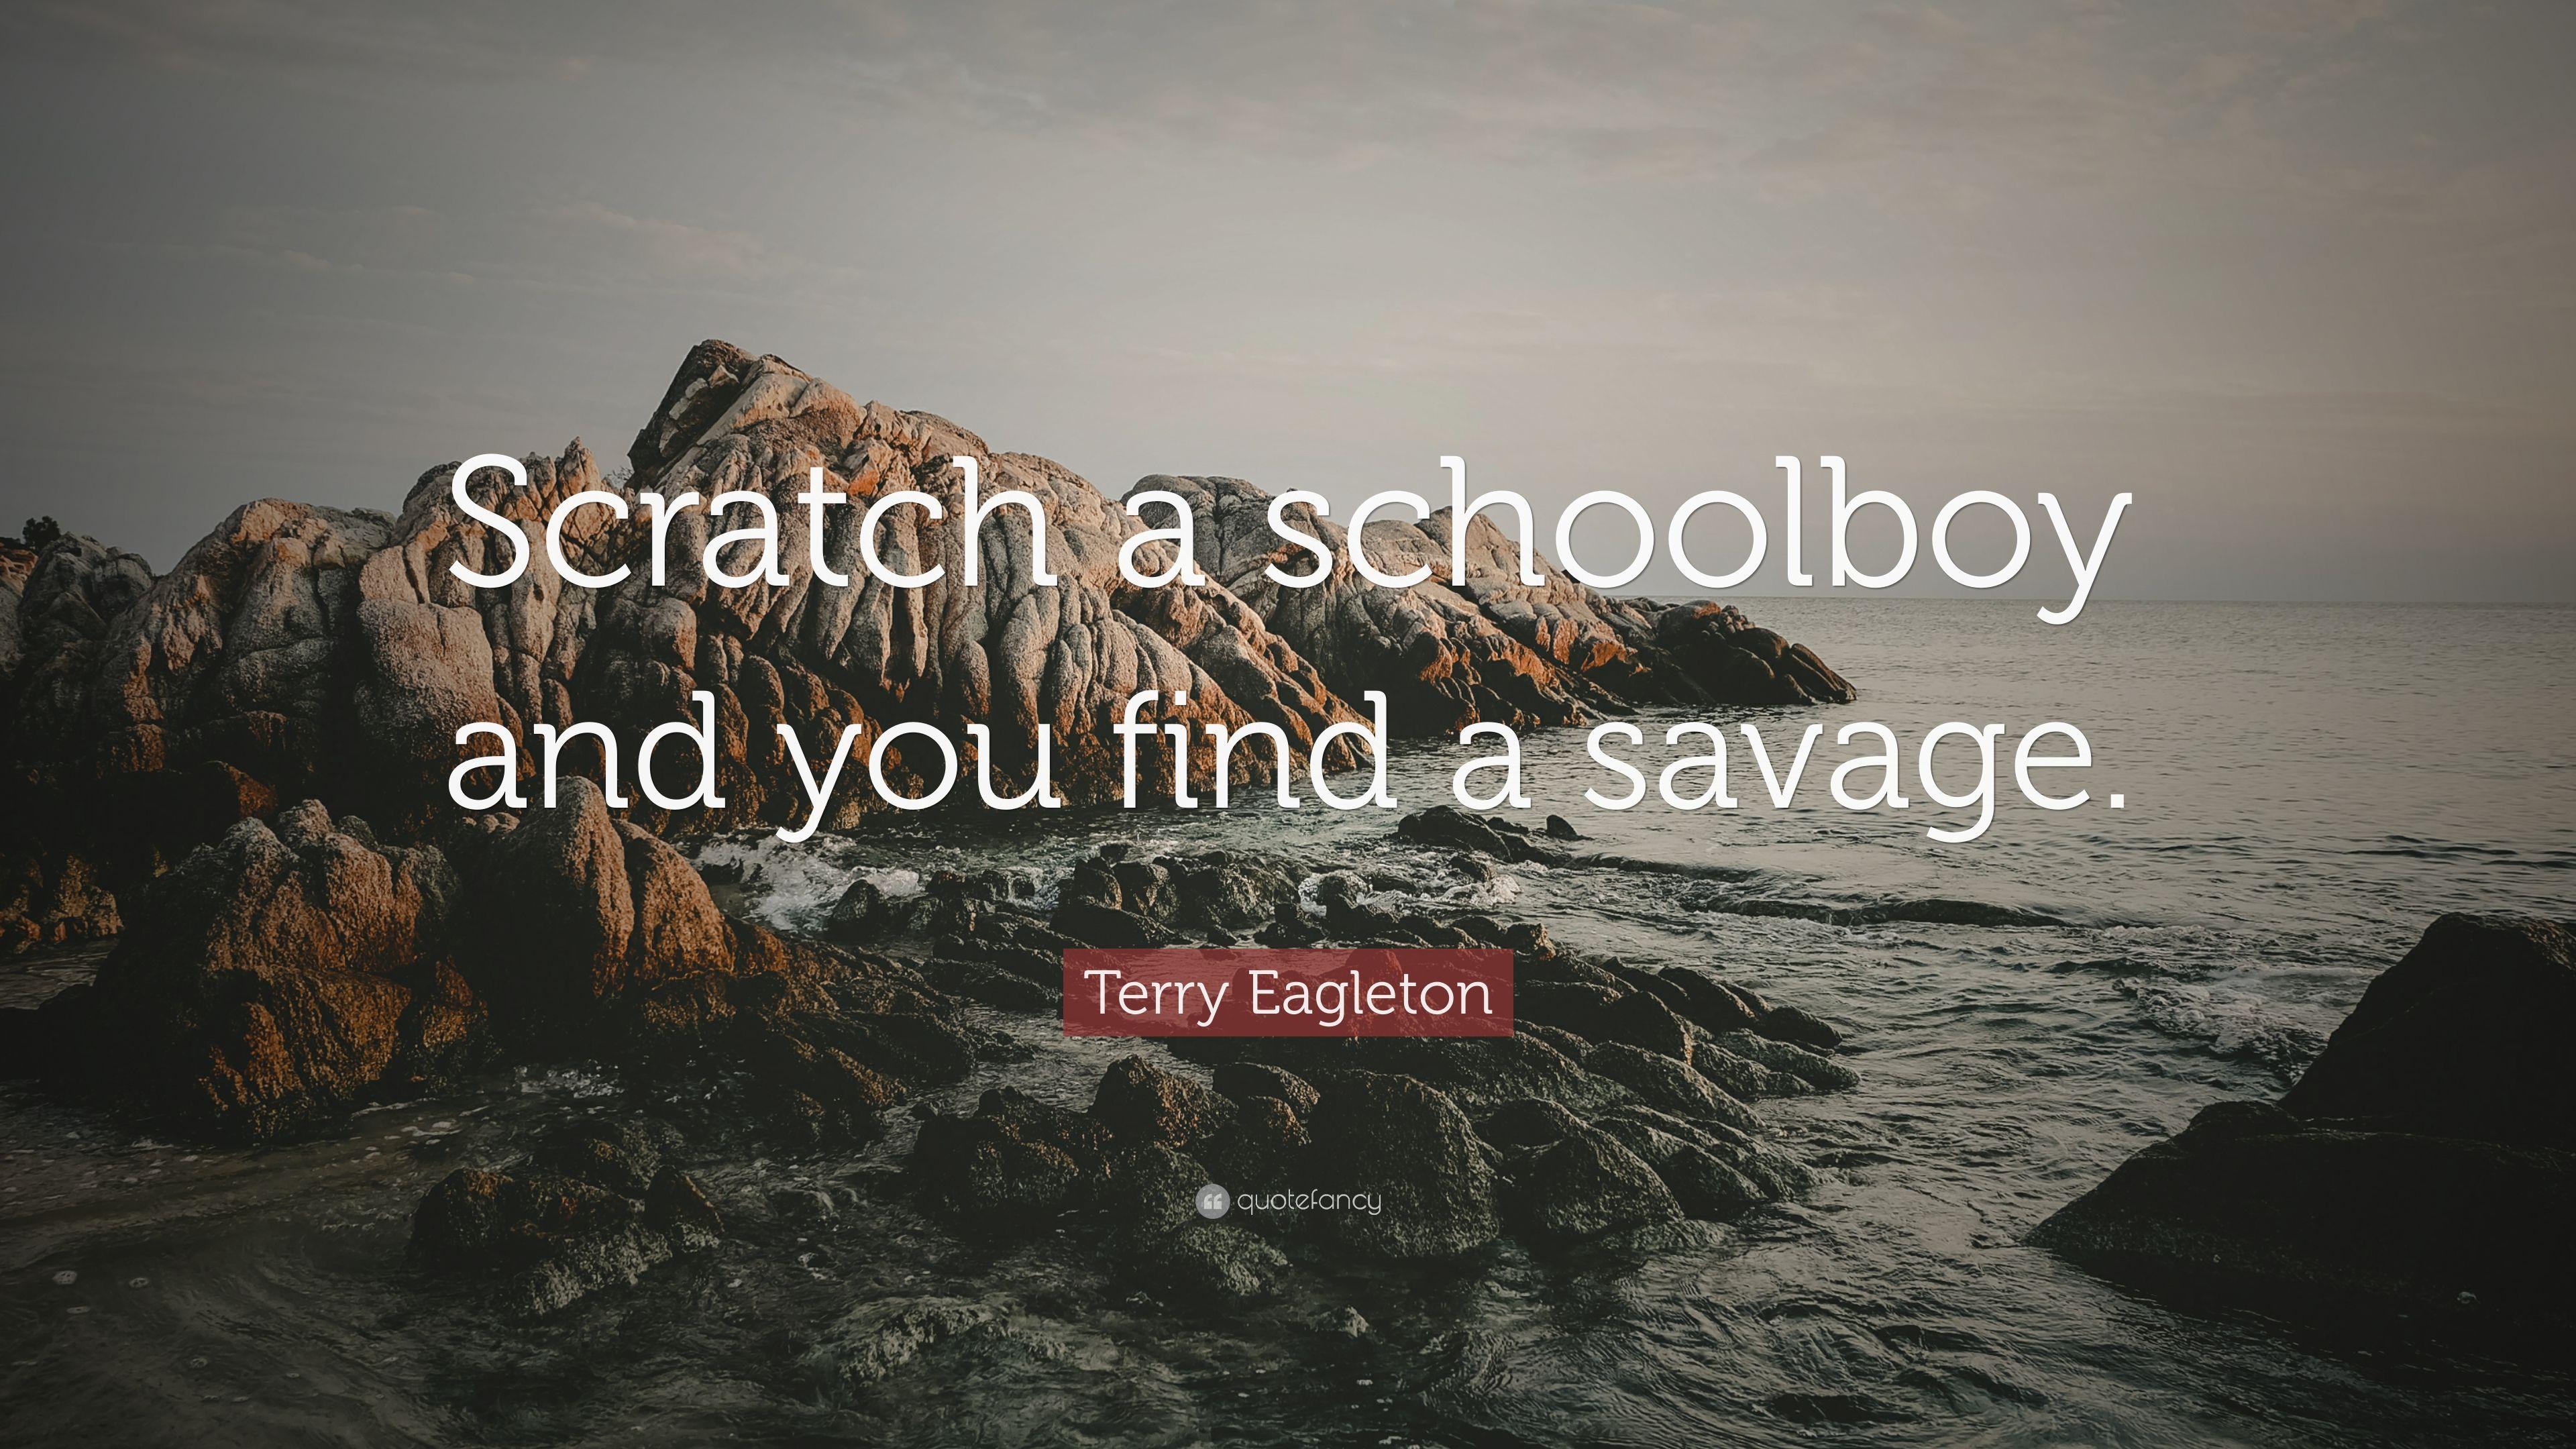 Terry Eagleton Quote: “Scratch a schoolboy and you find a savage